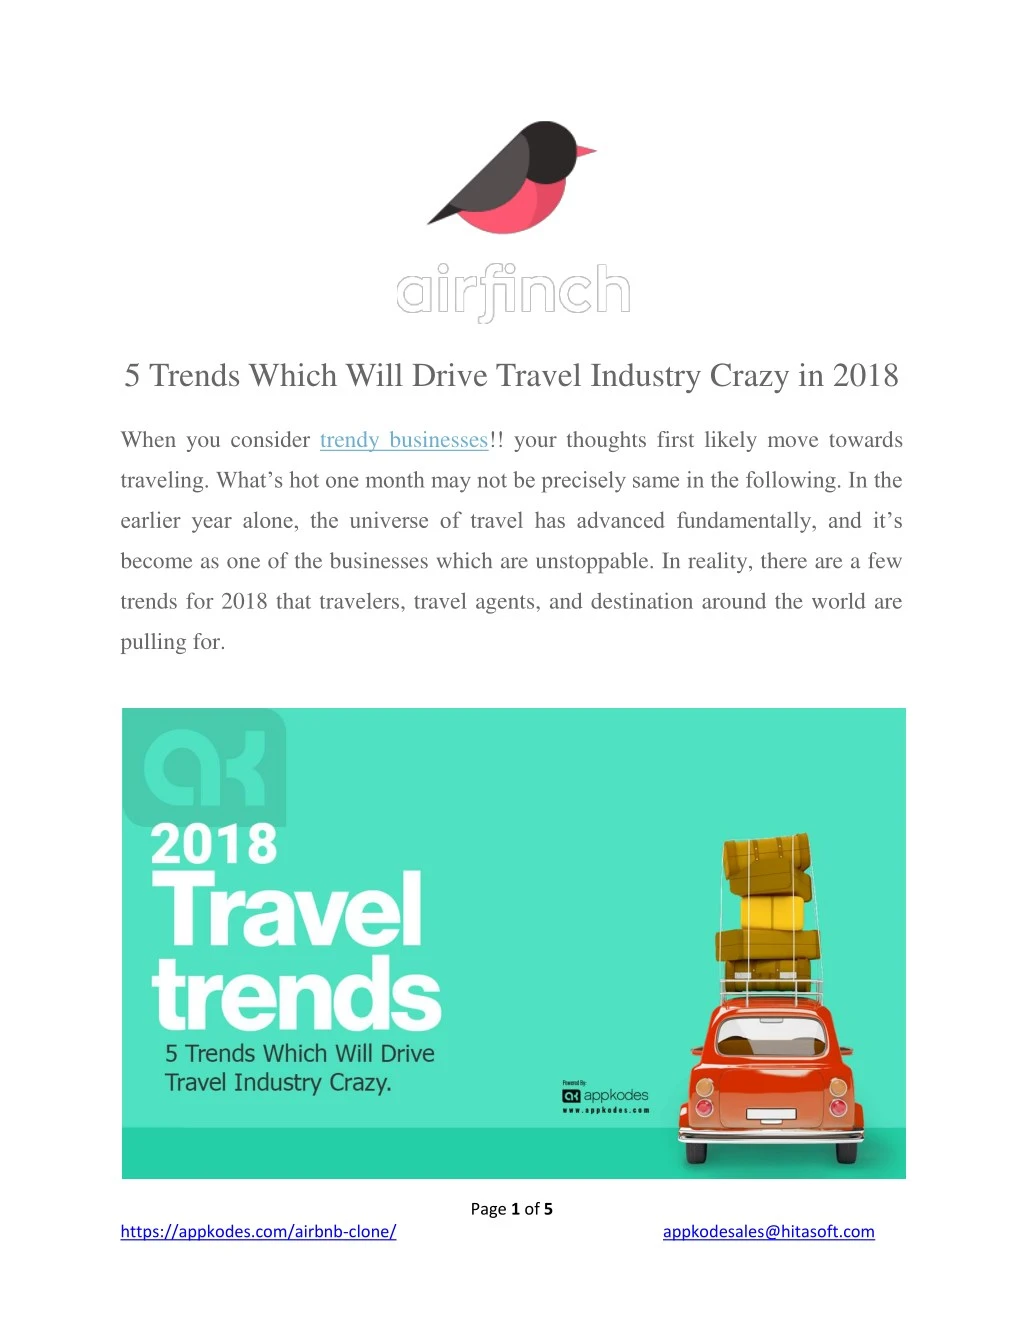 5 trends which will drive travel industry crazy